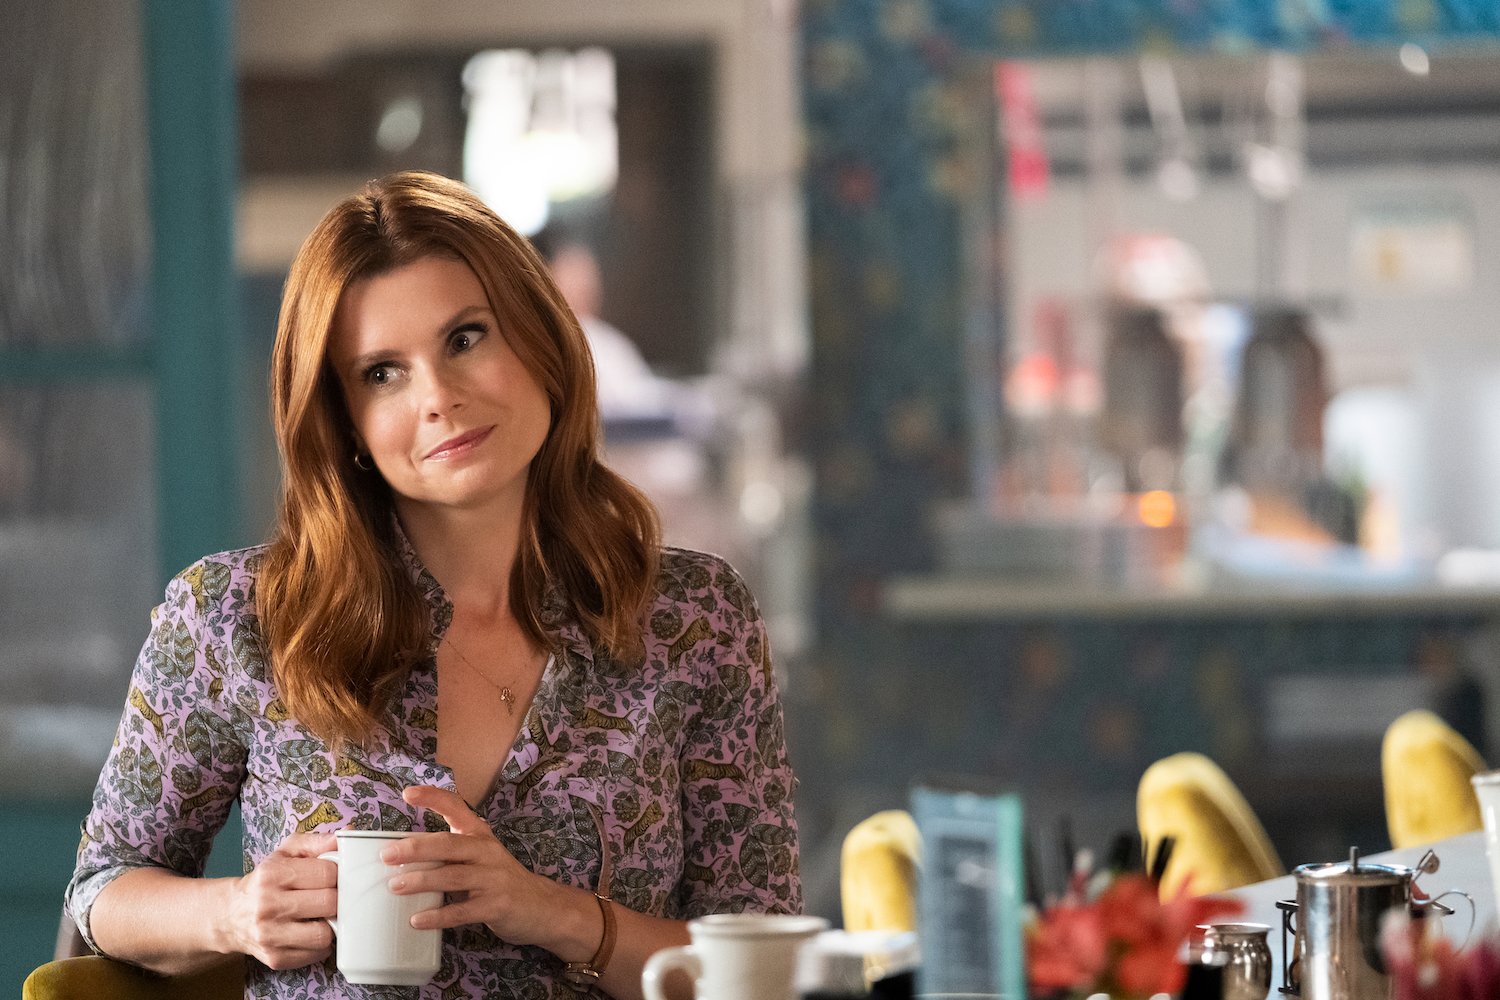 Sweet Magnolias: JoAnna Garcia Swisher holds a cup of coffee